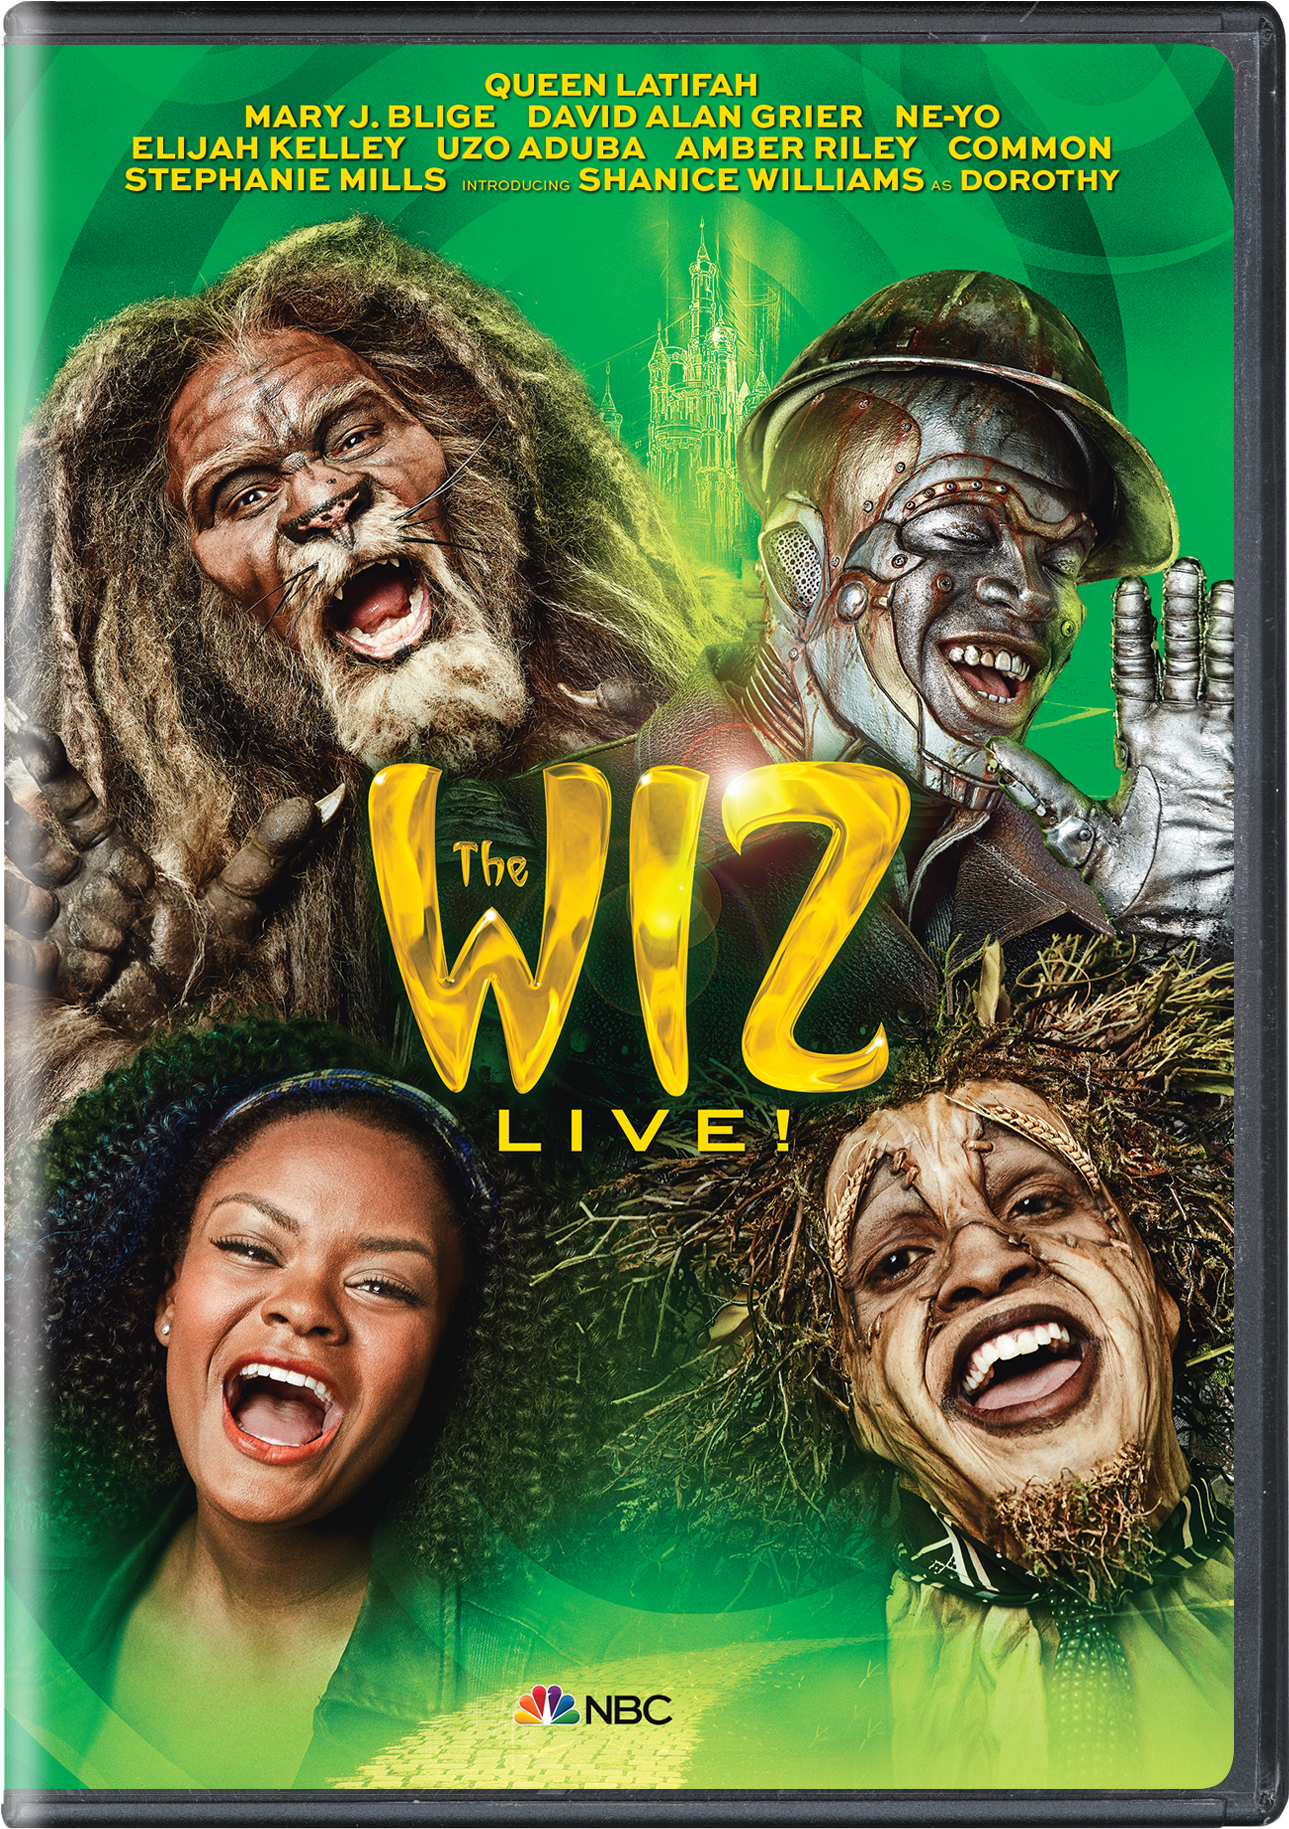 The Wiz Live! - DVD [ 2015 ]  - Musical Movies On DVD - Movies On GRUV